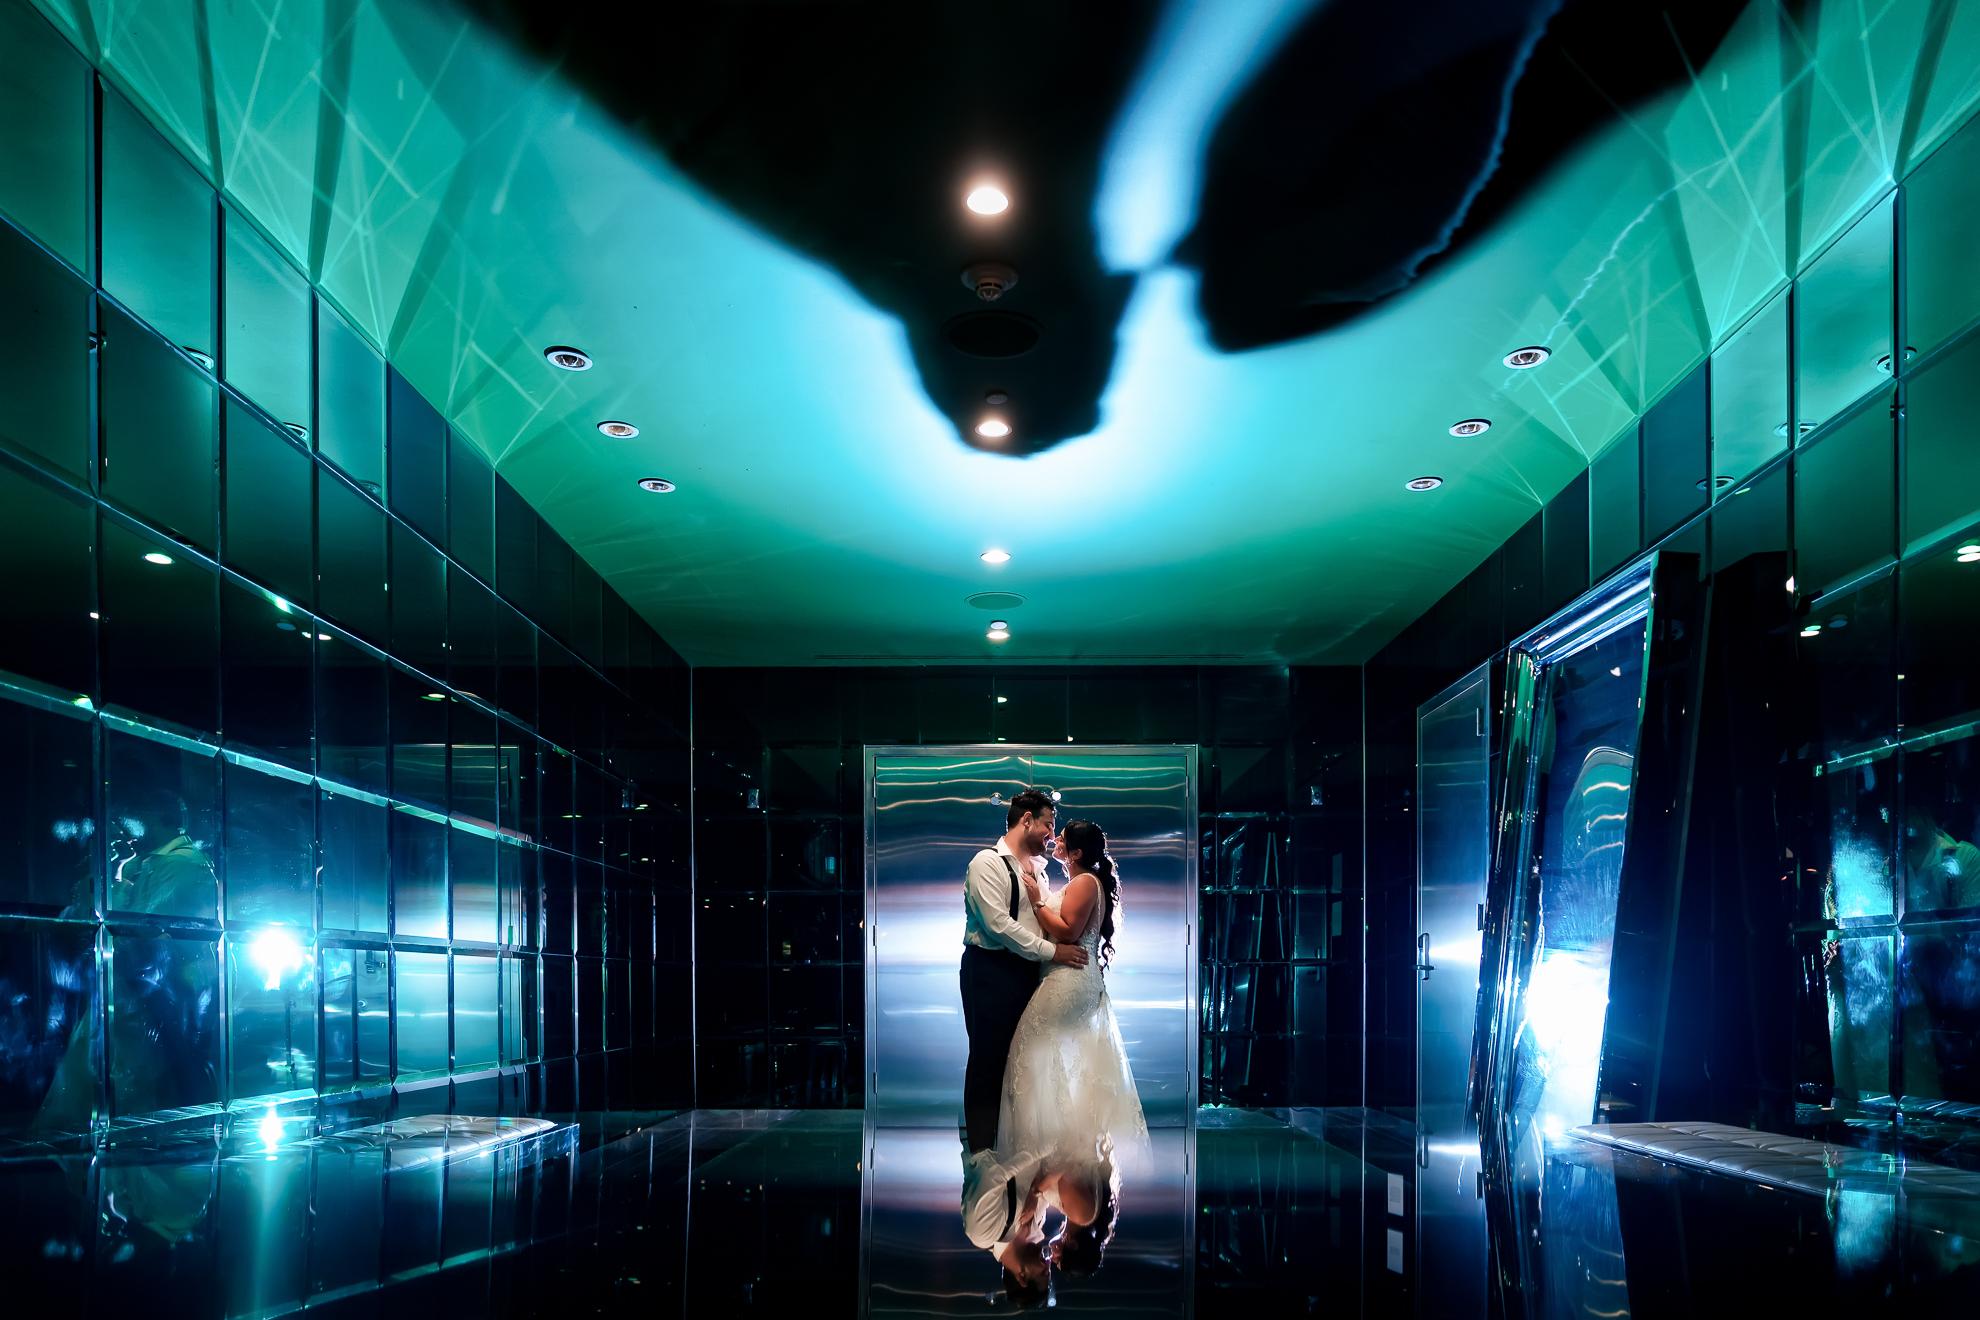 A bride and groom standing in an elevator.